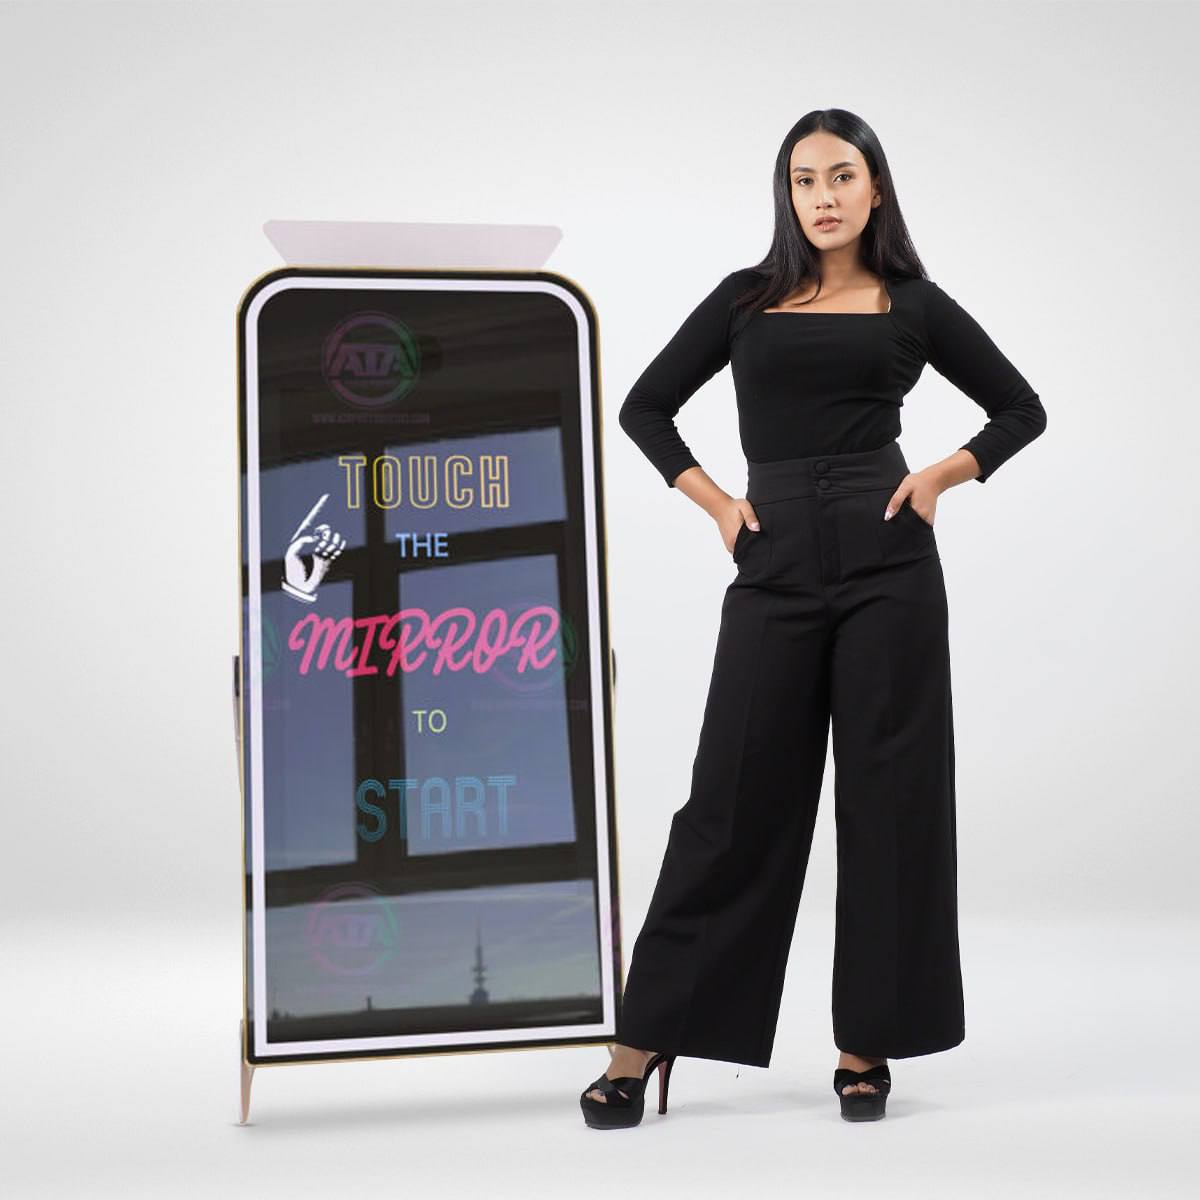 A woman standing next to a mirror photo booth